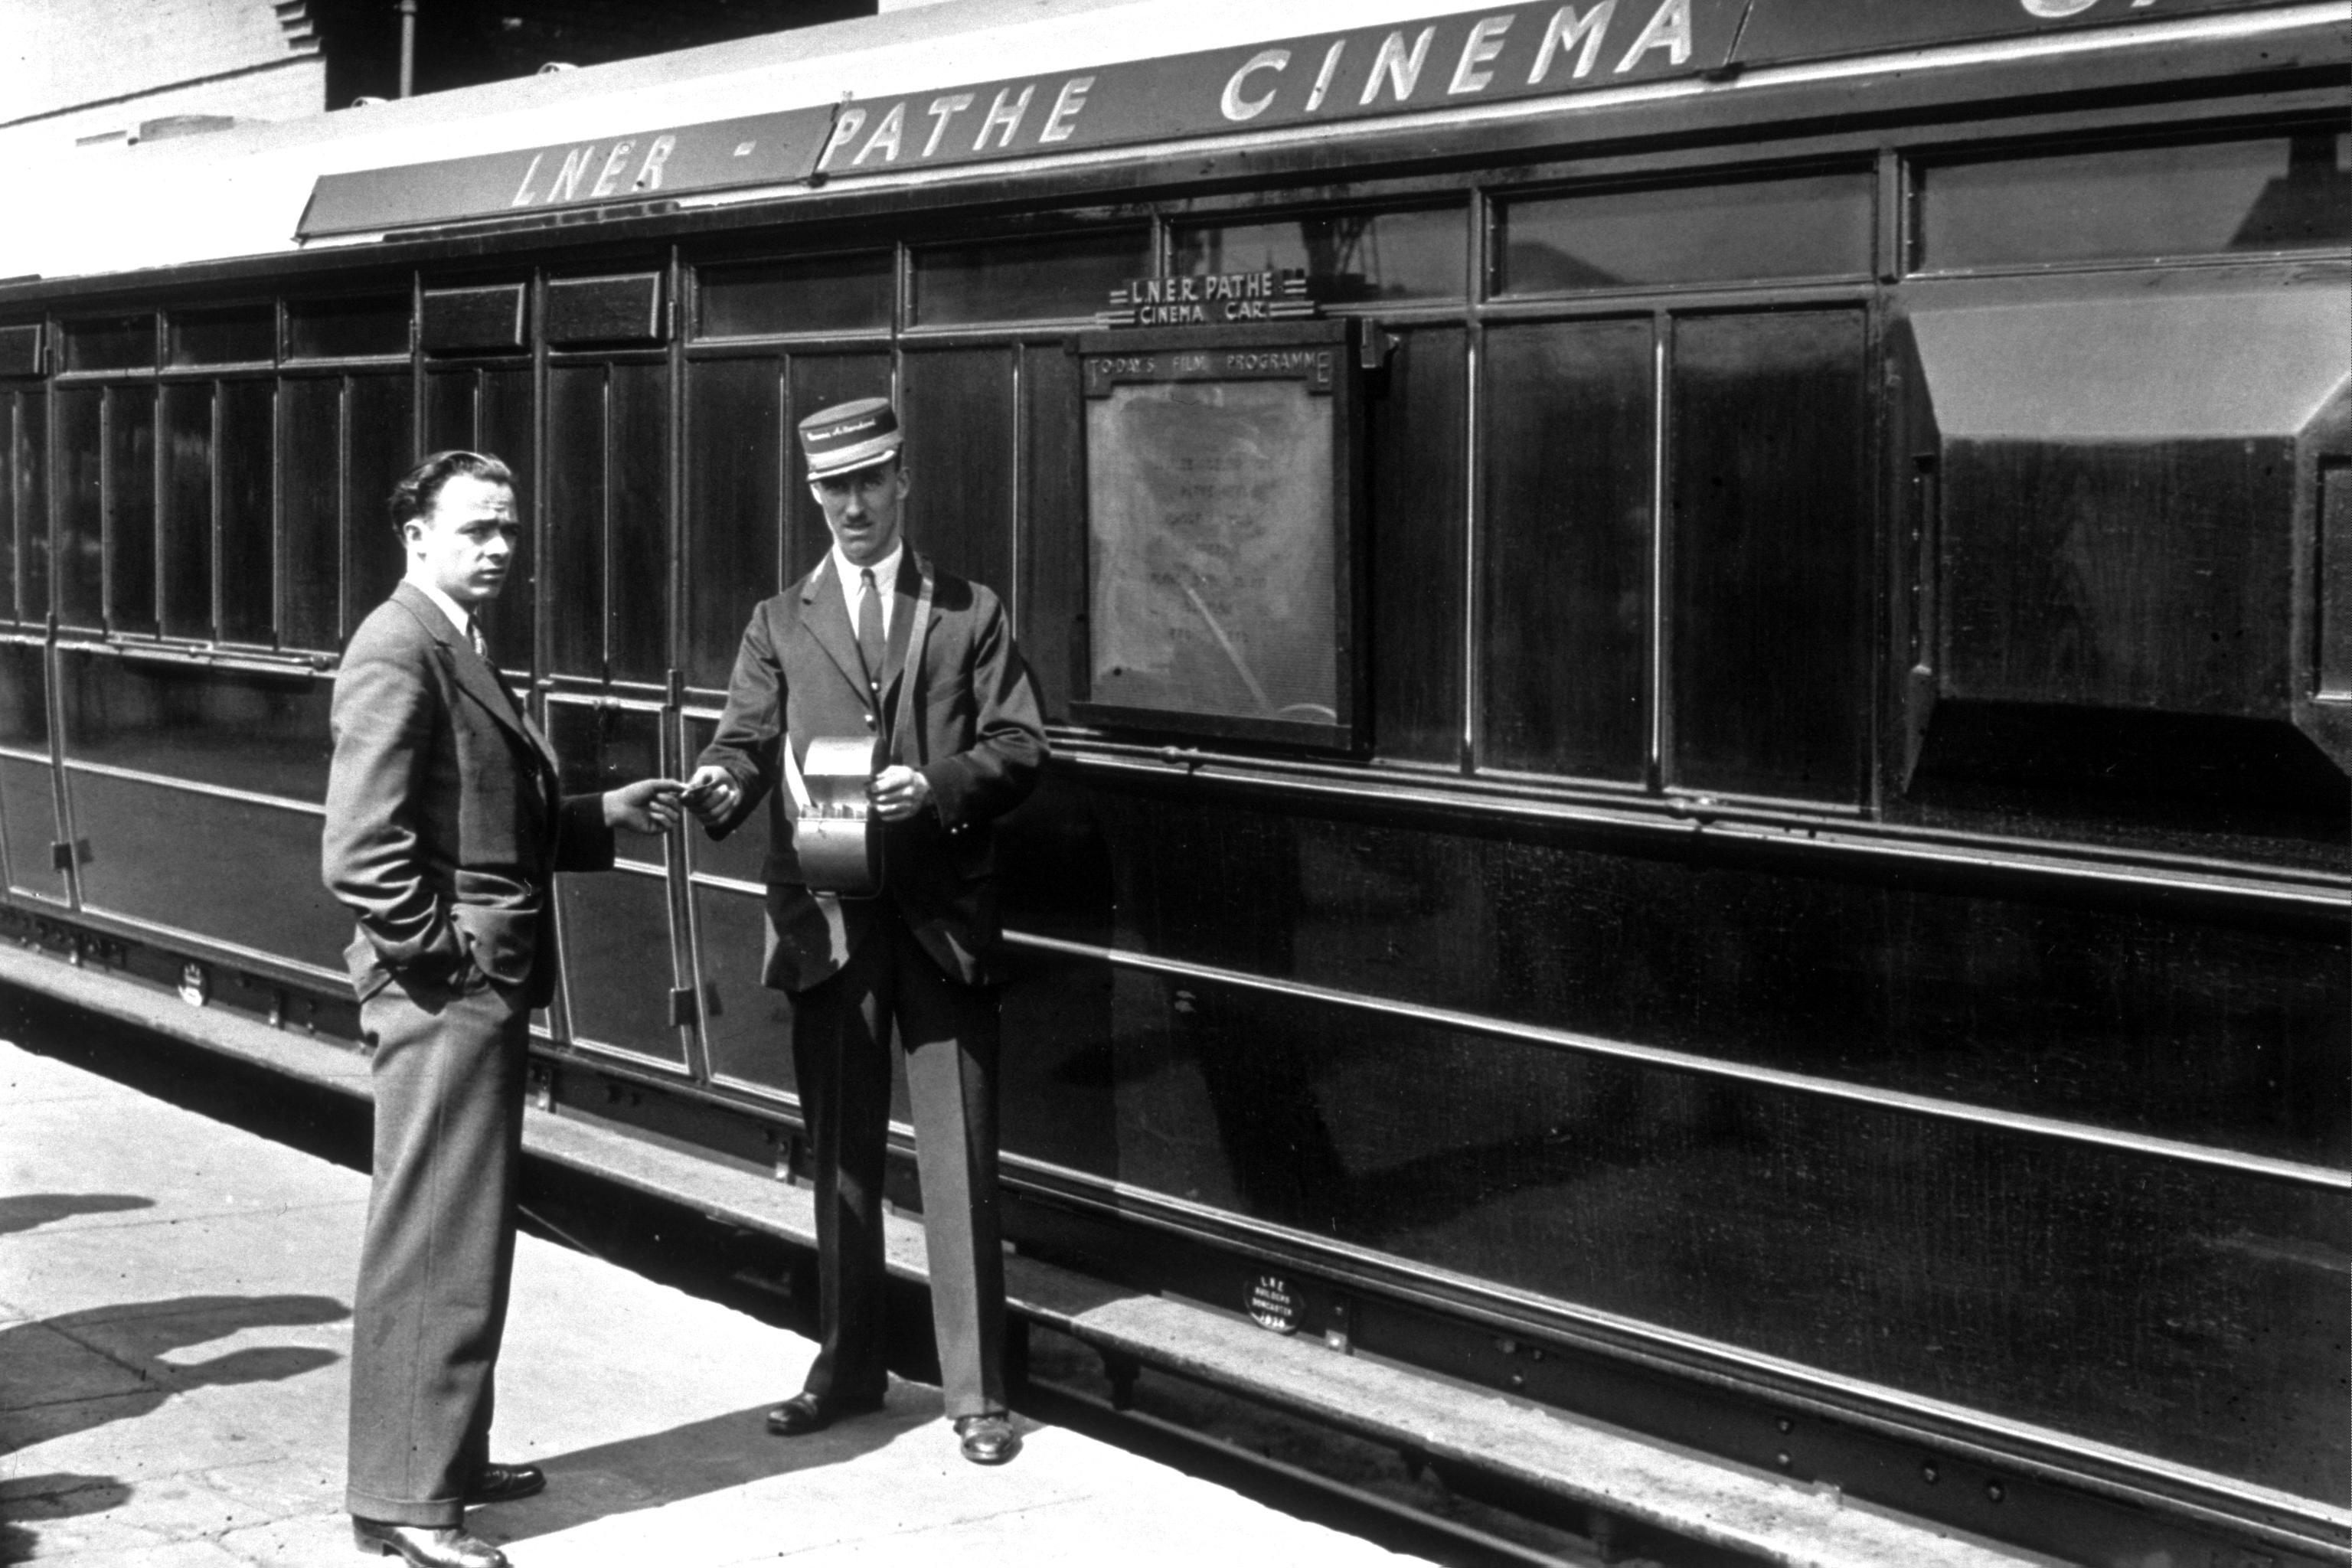 1938: A cinema attendant giving a ticket to a passenger for the Pathe cinema car, which ran on LNER trains. (Photo by Topical Press Agency/Getty Images)